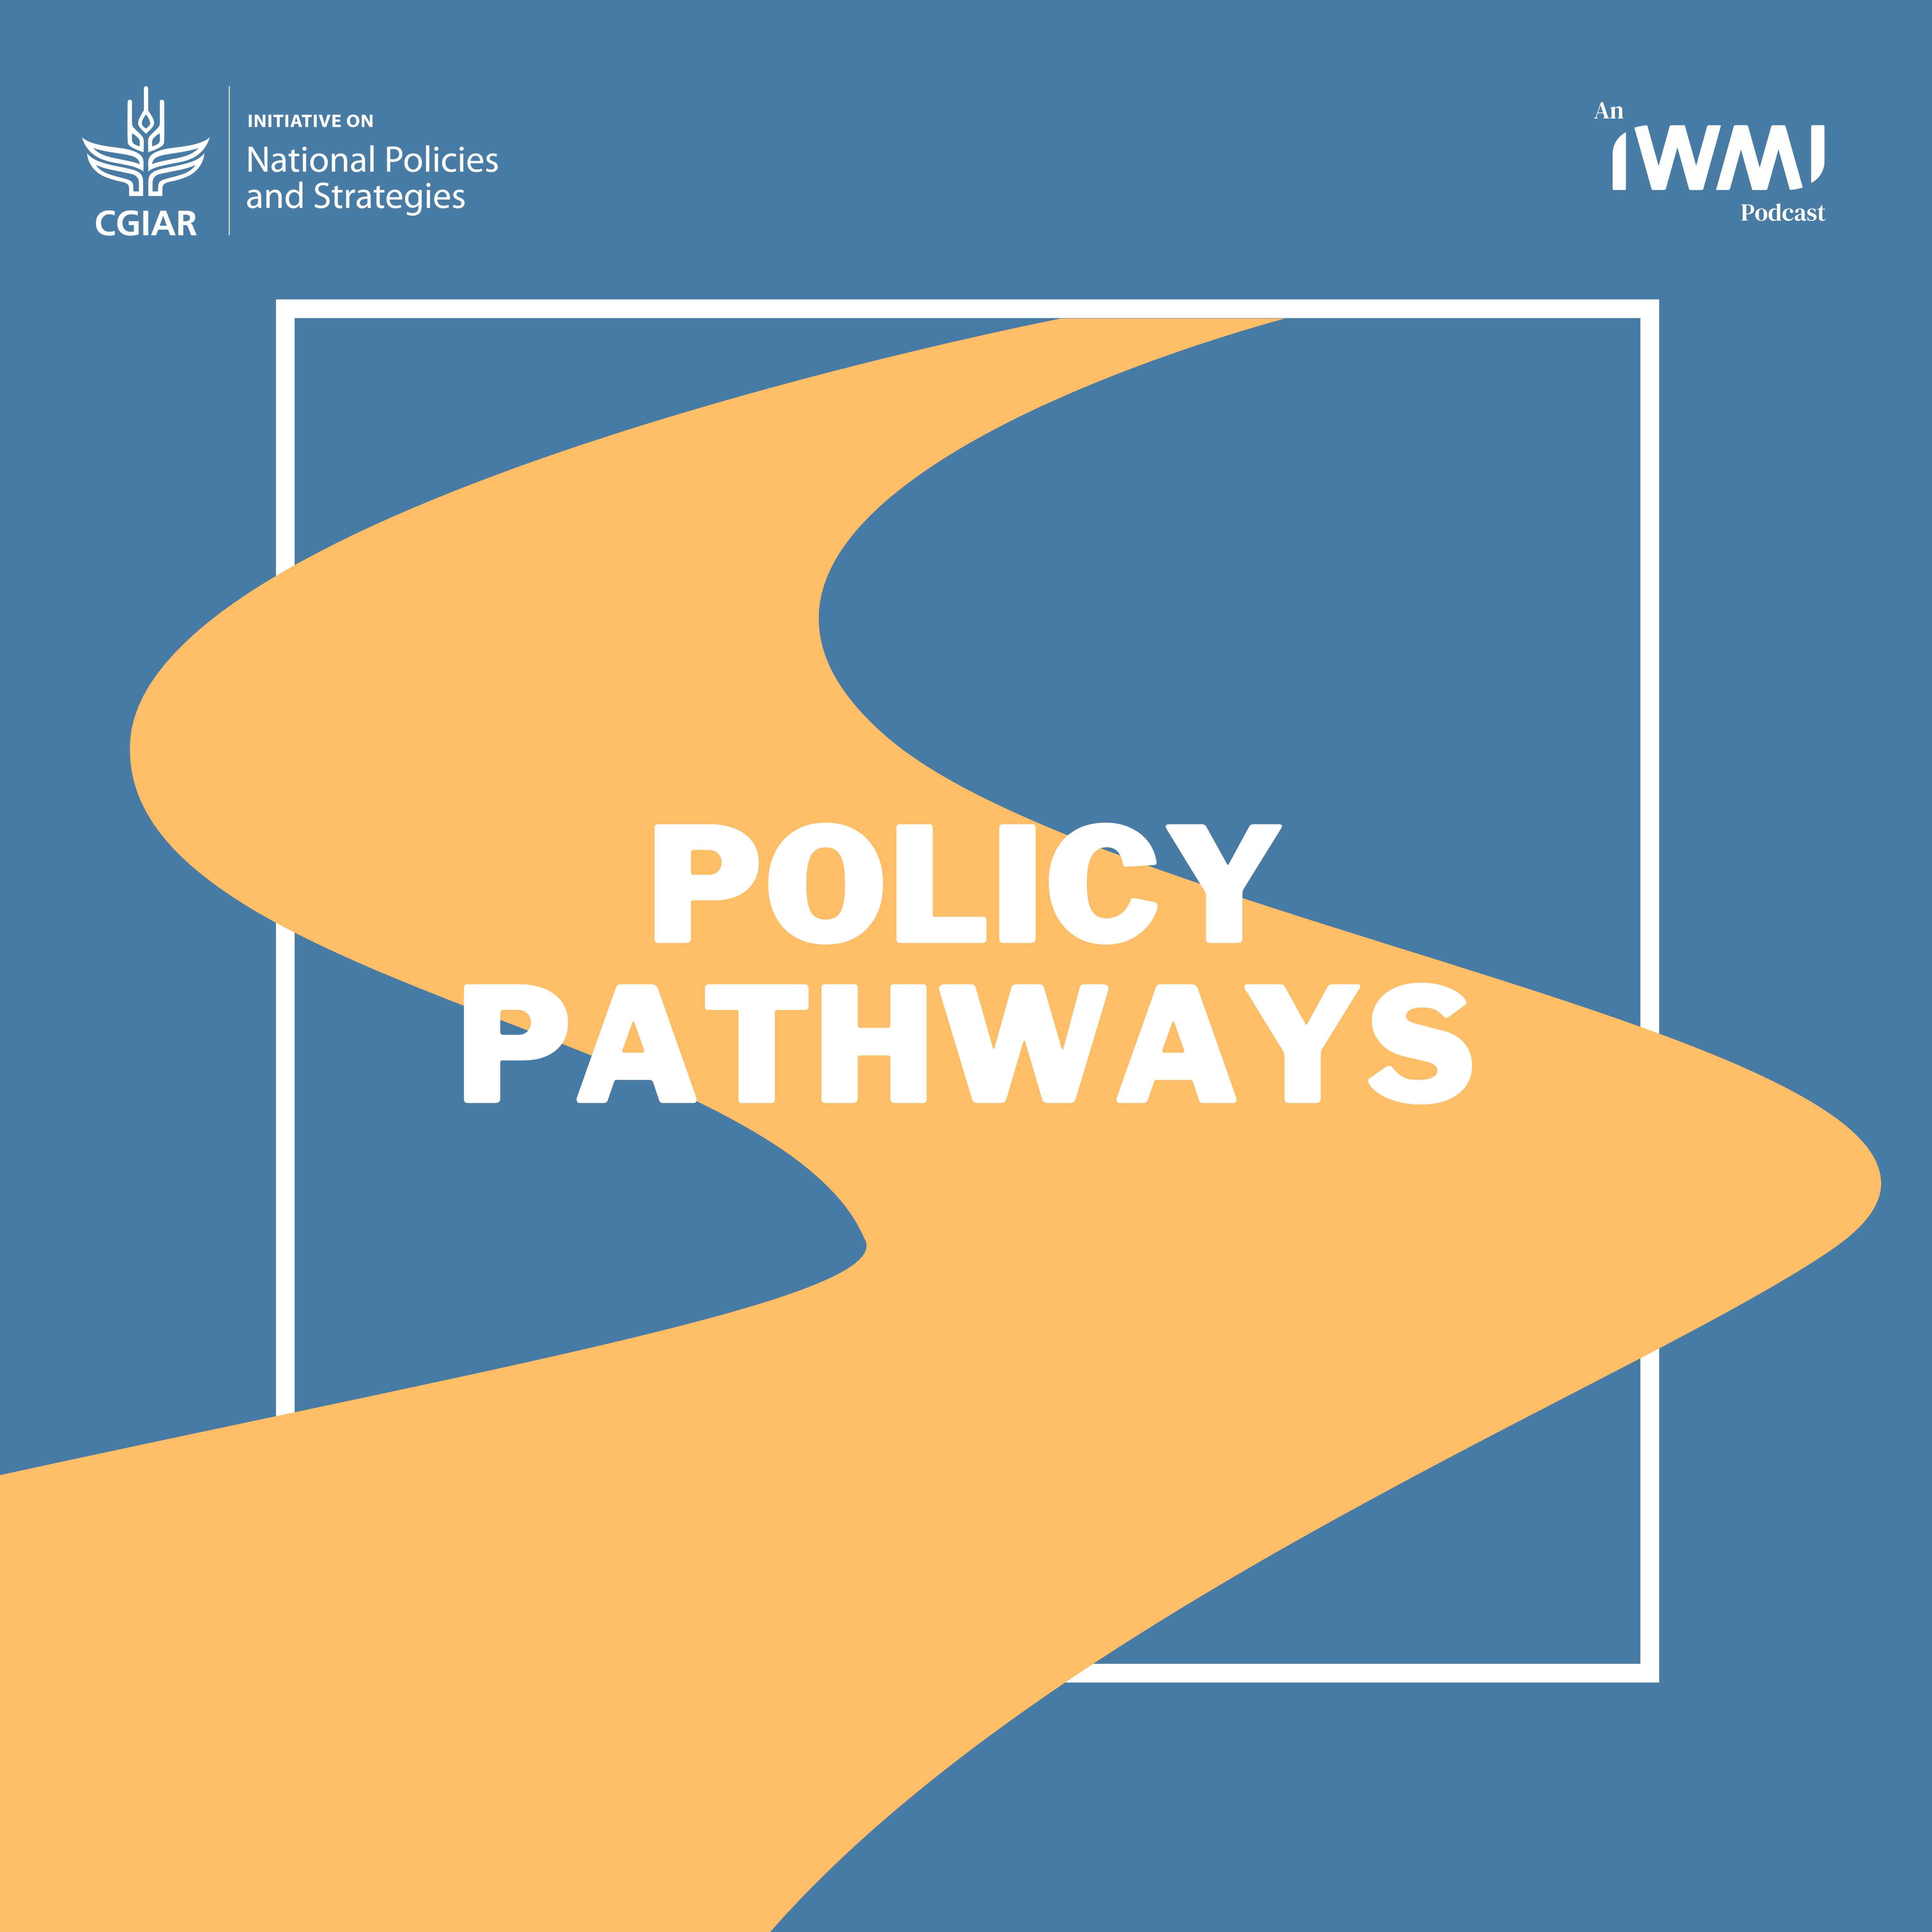 New podcast explores policy coherence and system transformation in food, land and water